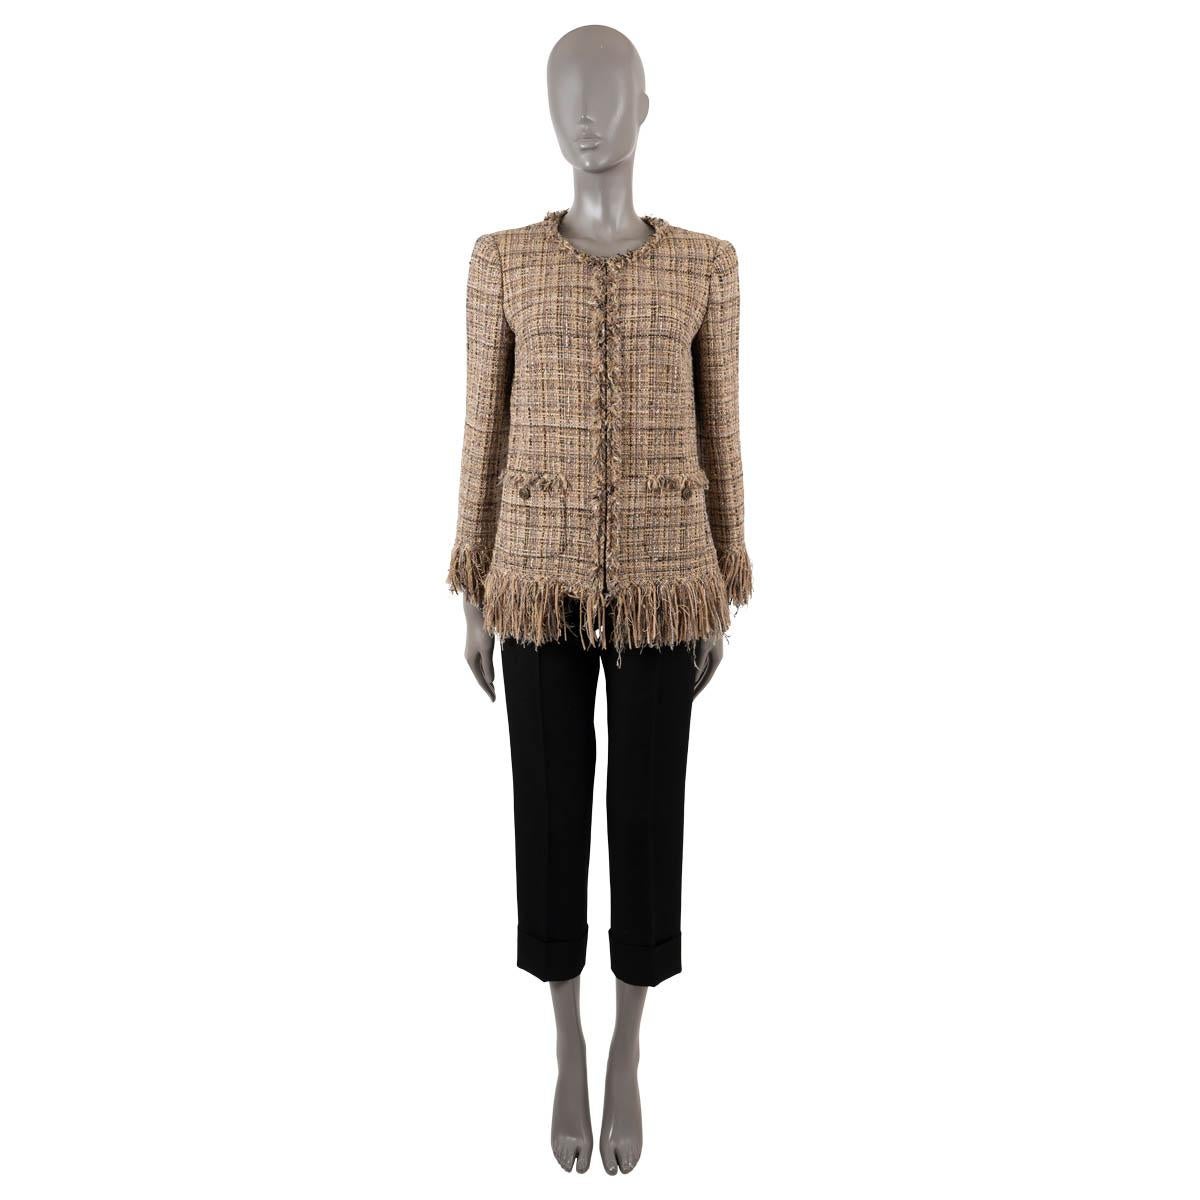 100% authentic Chanel tweed jacket in beige, brown, grey and black goatksin leather (36%), wool (21%), polyester (16%), cotton (7%), nylon (7%), viscose (5%), acrylic (3%), other fibers (3%) and linen (2%). Features a collarless round neck, fringed